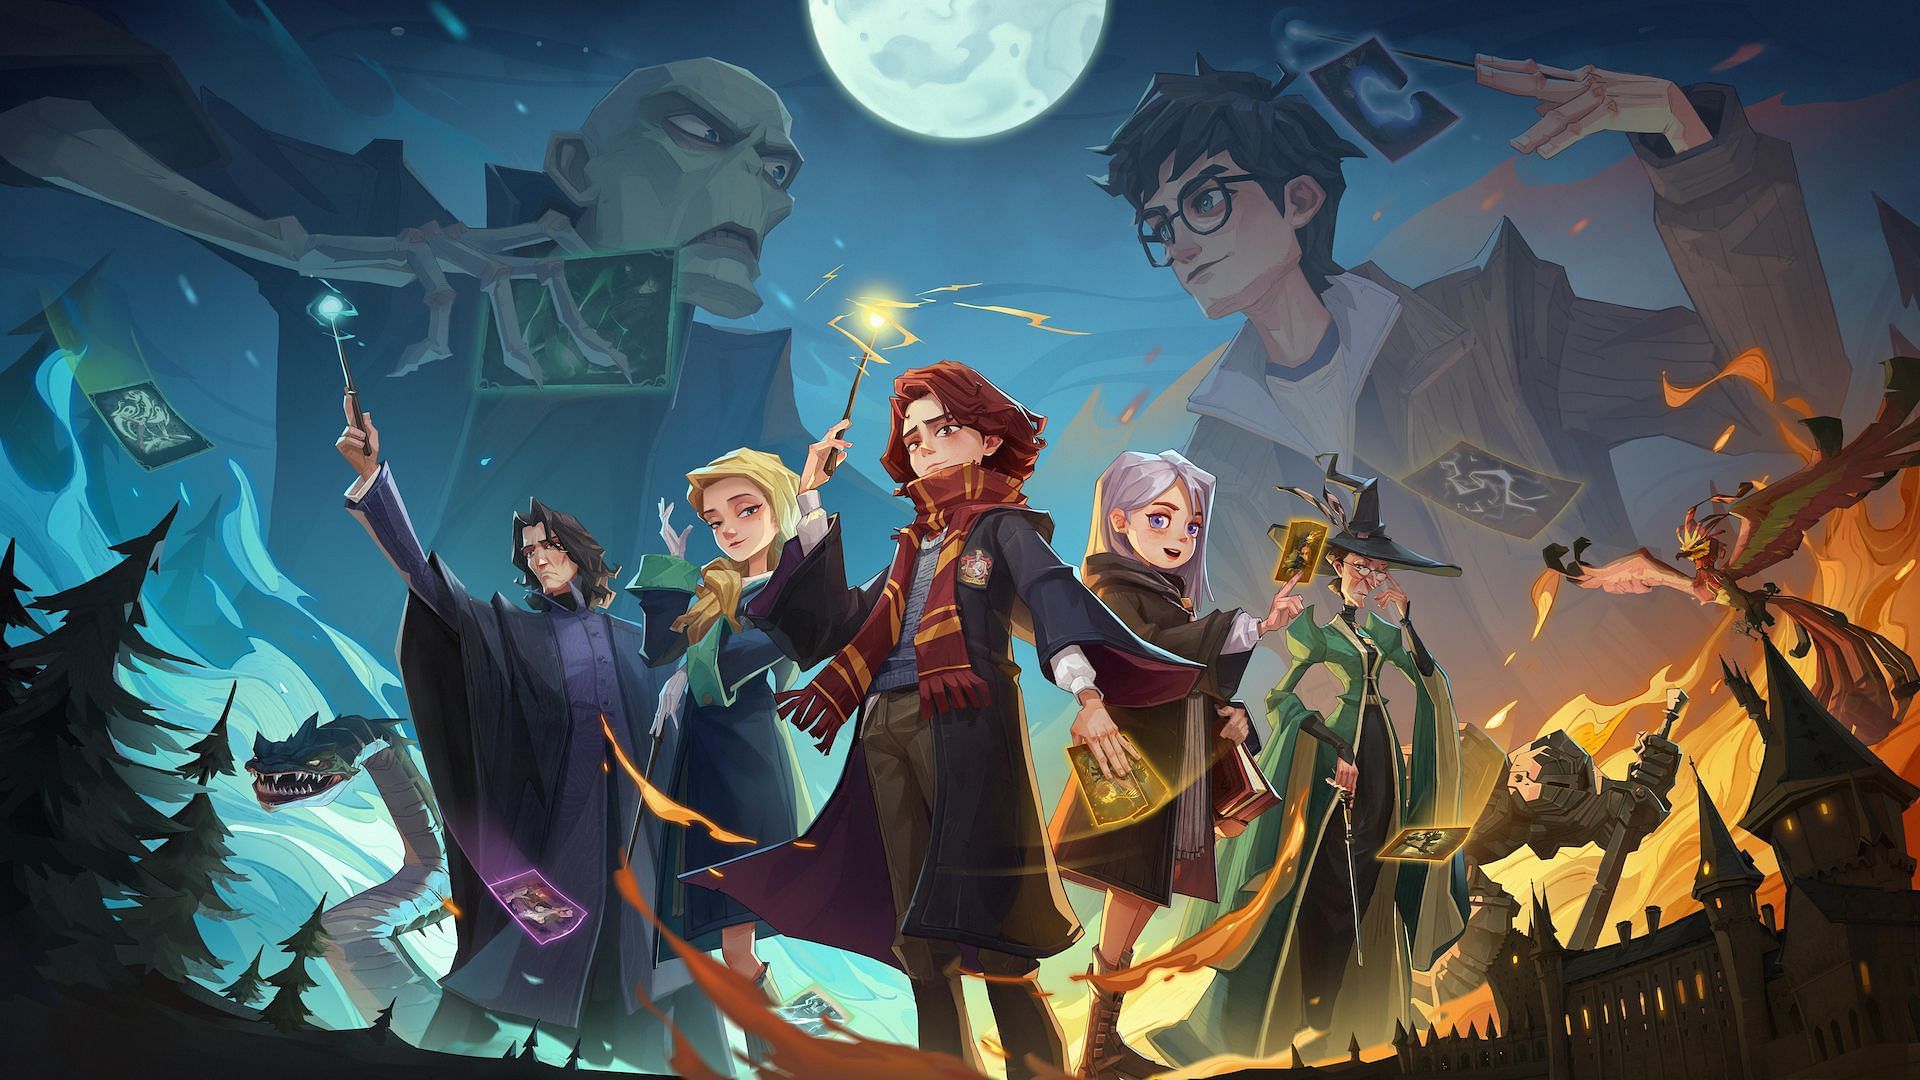 All in-game characters along with Harry Potter and Voldemort in the background.